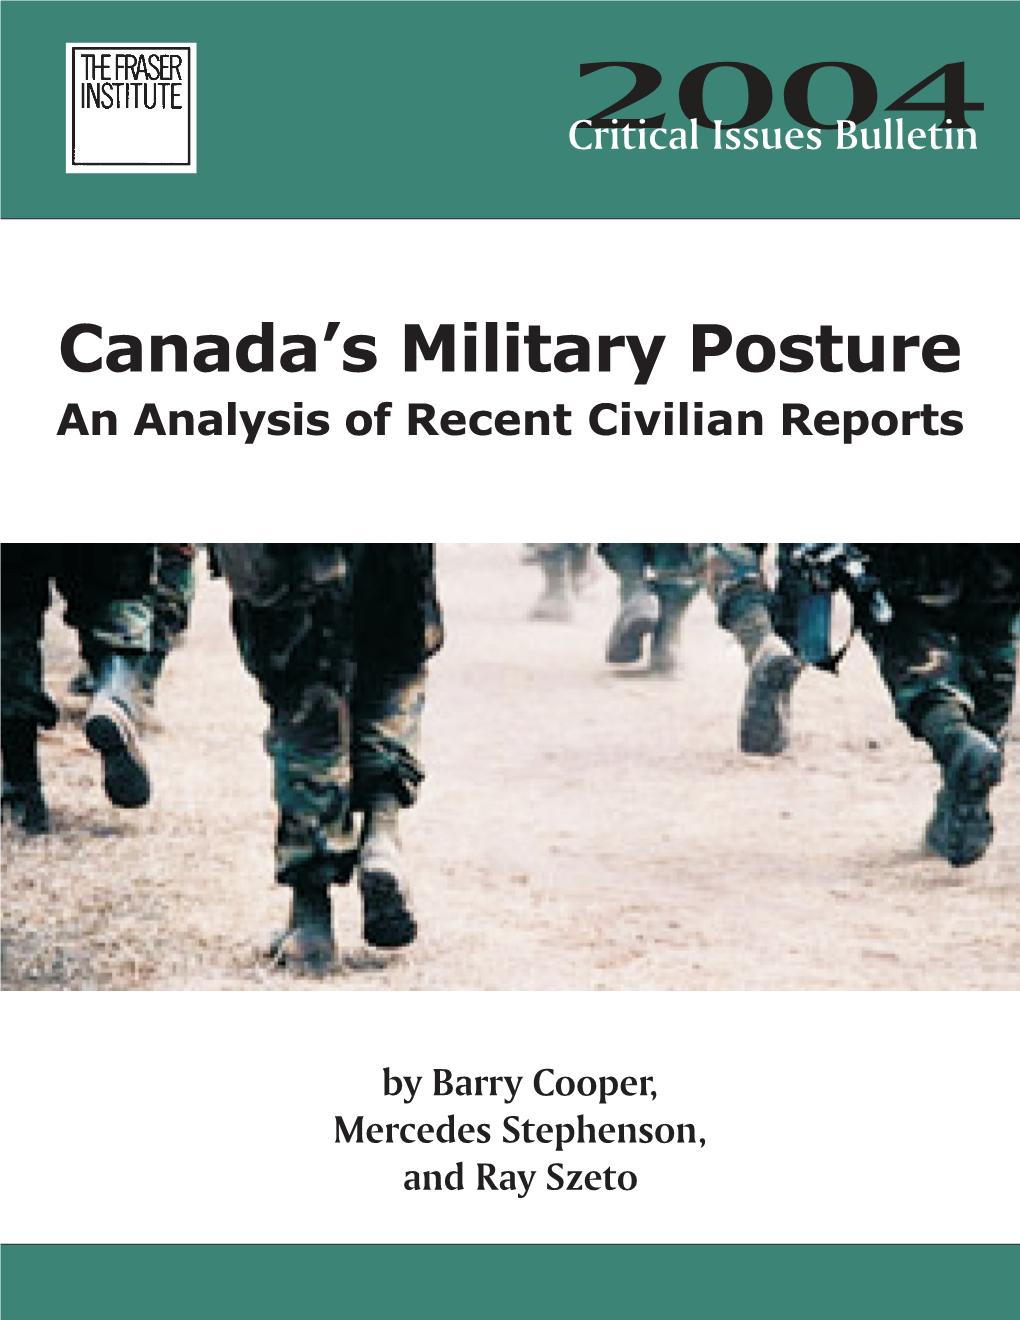 Canada's Military Posture: an Analysis of Recent Civilian Reports